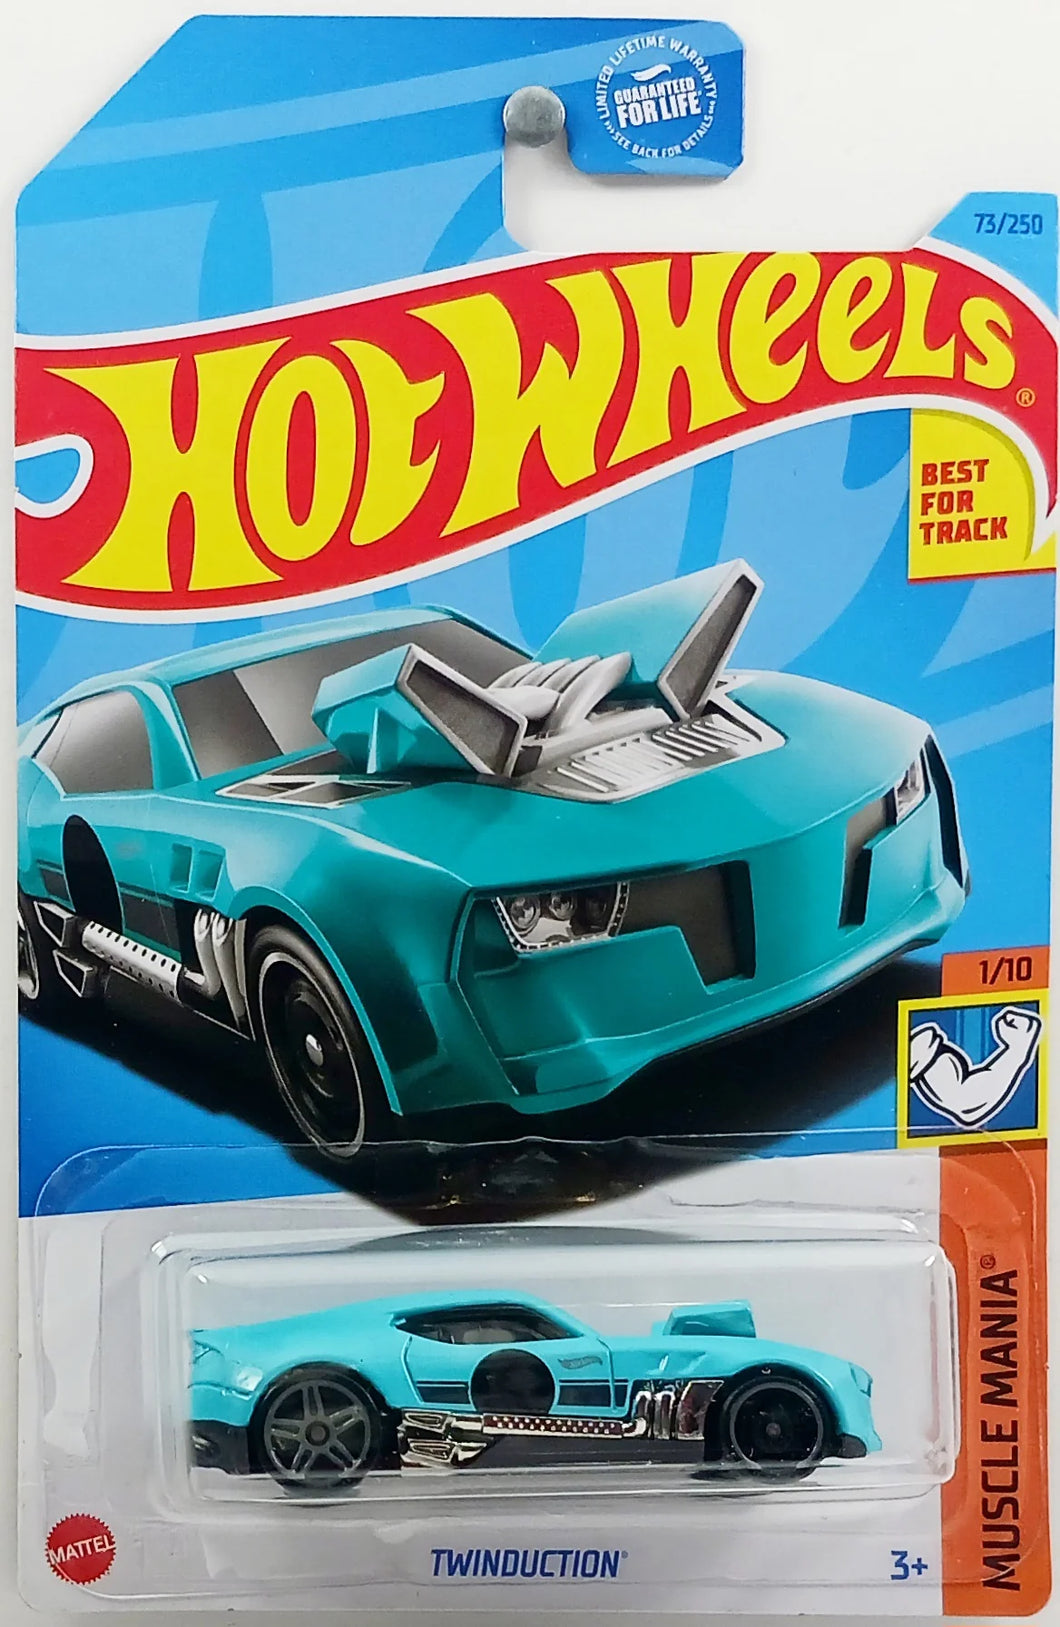 Hot Wheels Twinduction Muscle Mania 1/10 73/250 - Assorted Colors